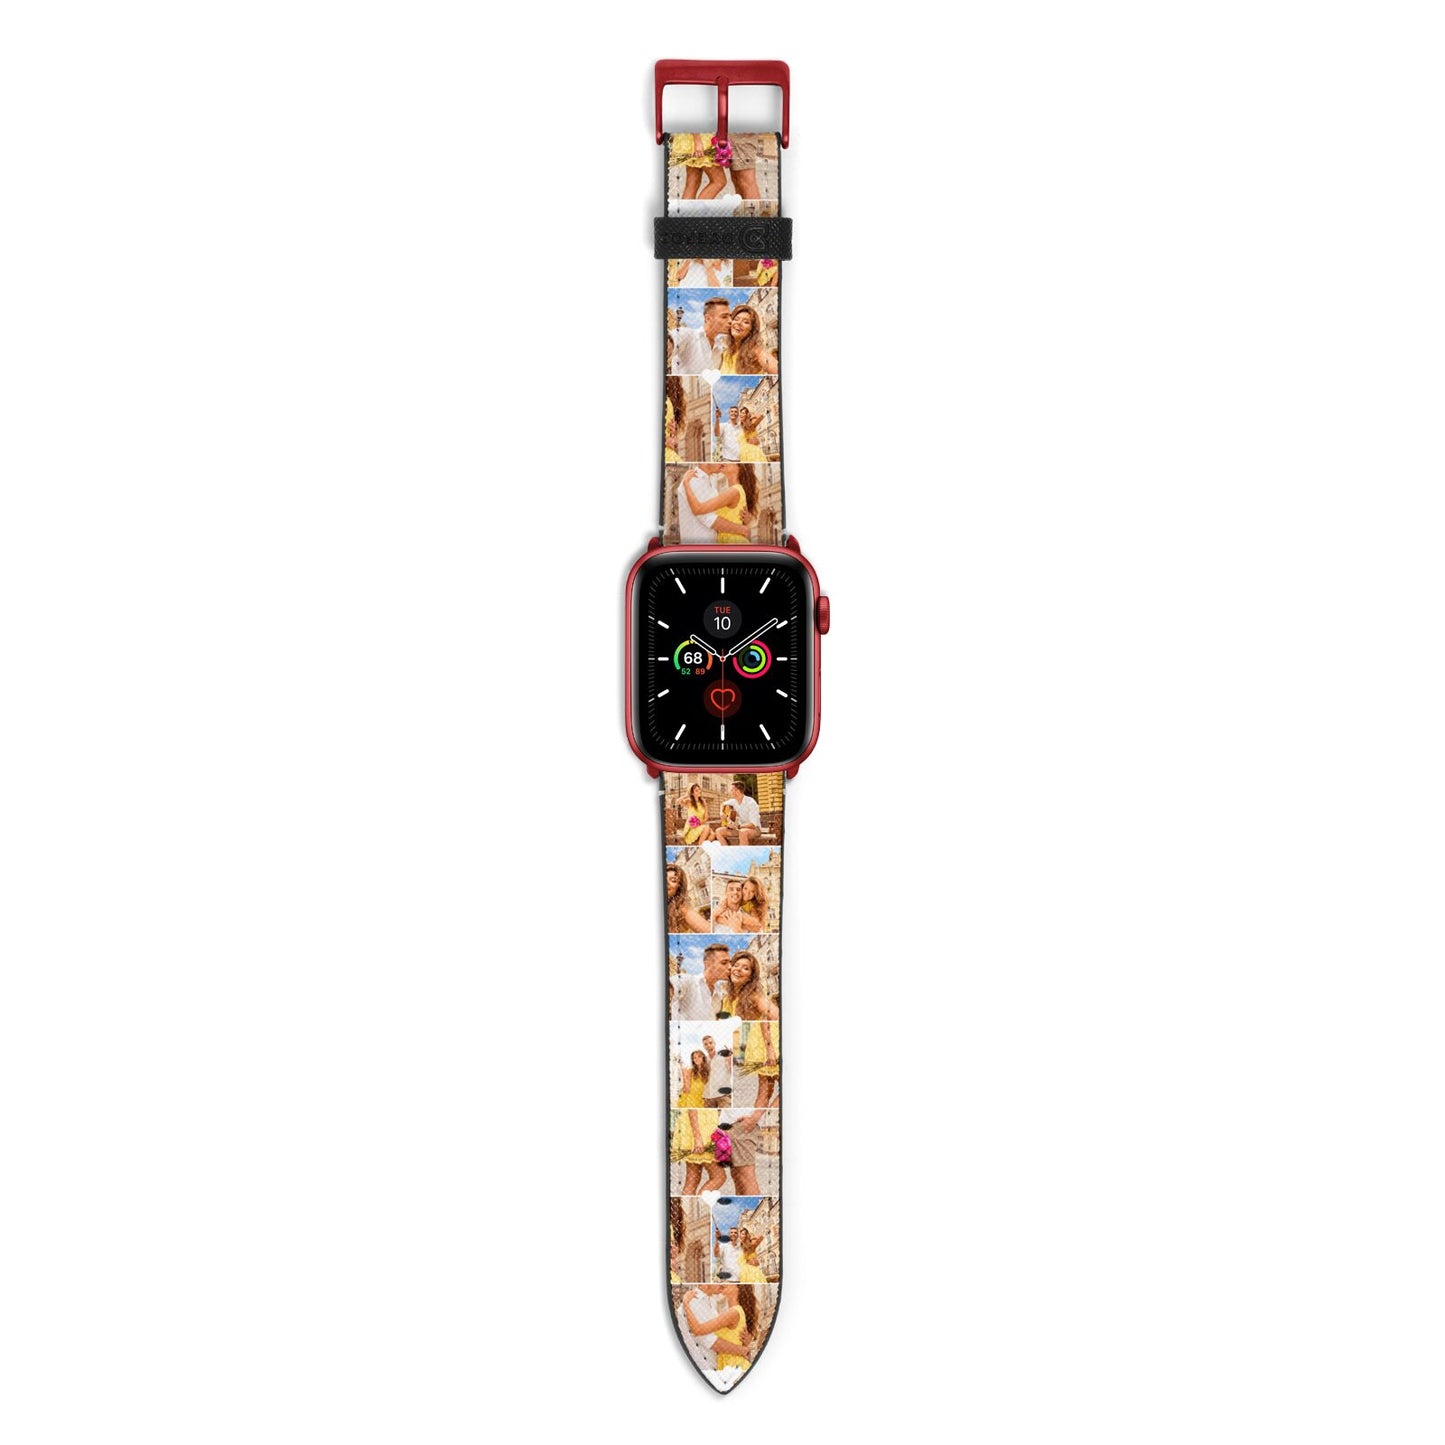 Photo Collage Heart Apple Watch Strap with Red Hardware